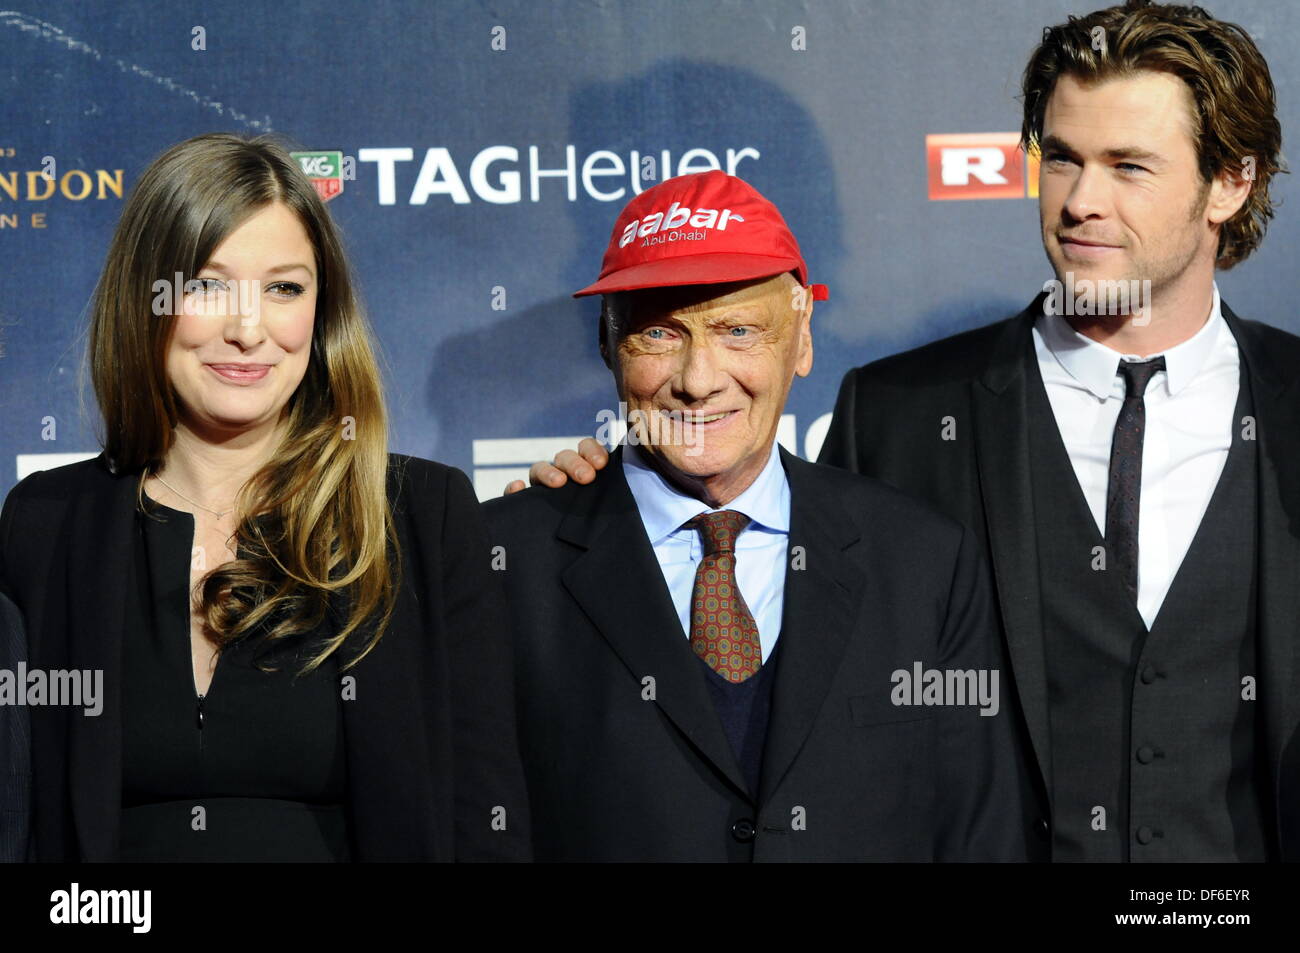 Cologne, Germany. 28th Sep, 2013. Alexandra Maria Lara, Niki Lauda and  Chris Hemsworth (R) arrive for the German premiere of the movie 'Rush' in  Cologne, Germany, 28 September 2013. The movie opens